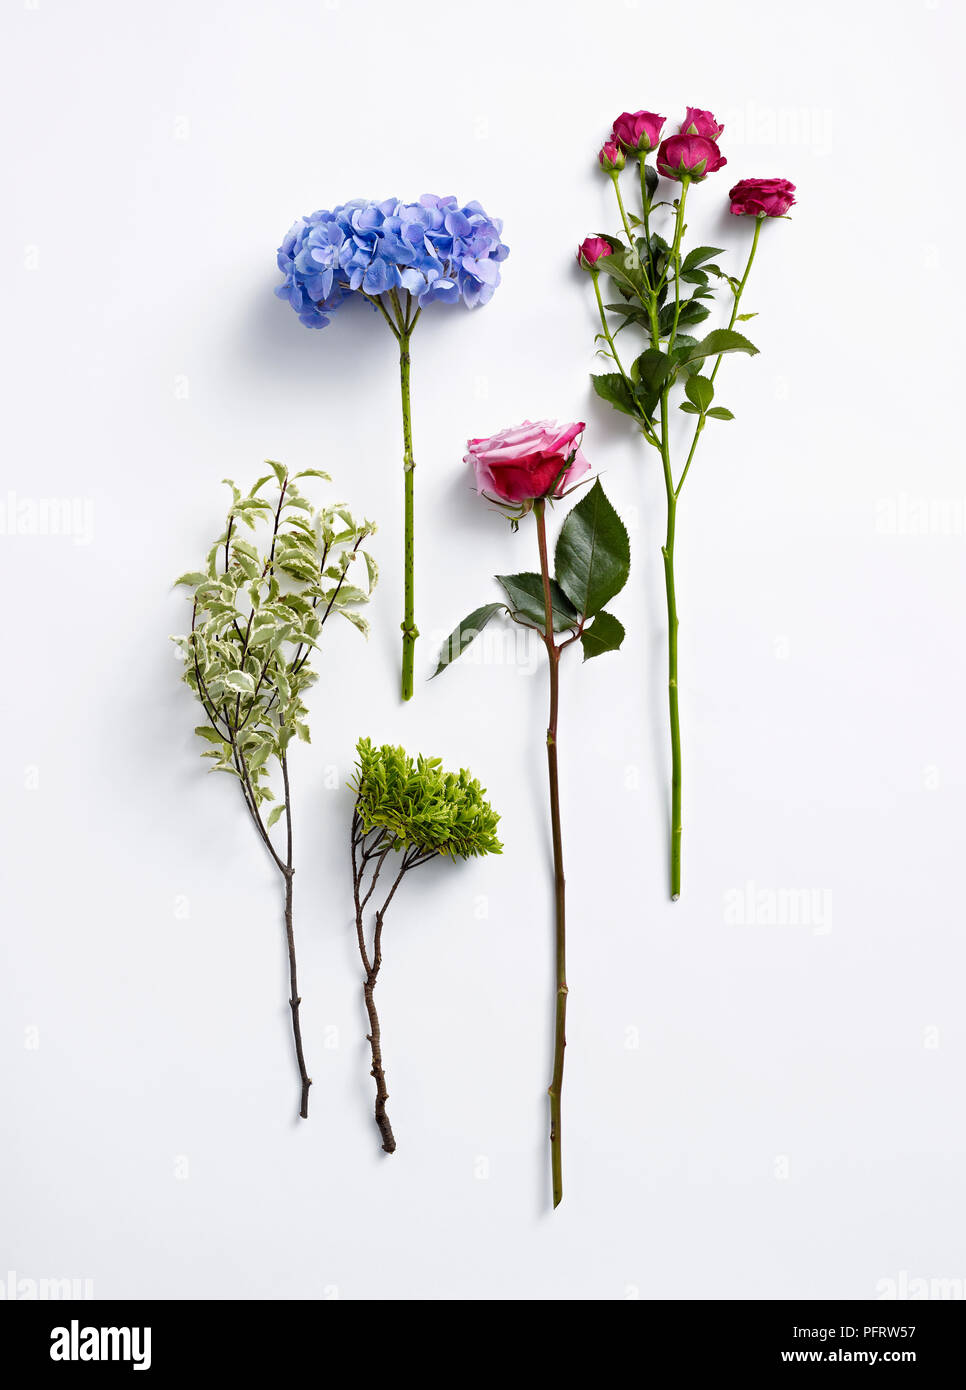 Flowers for flower arranging, variegated pittosporum, blue hydrangea, pink spray rose and pink rose Stock Photo